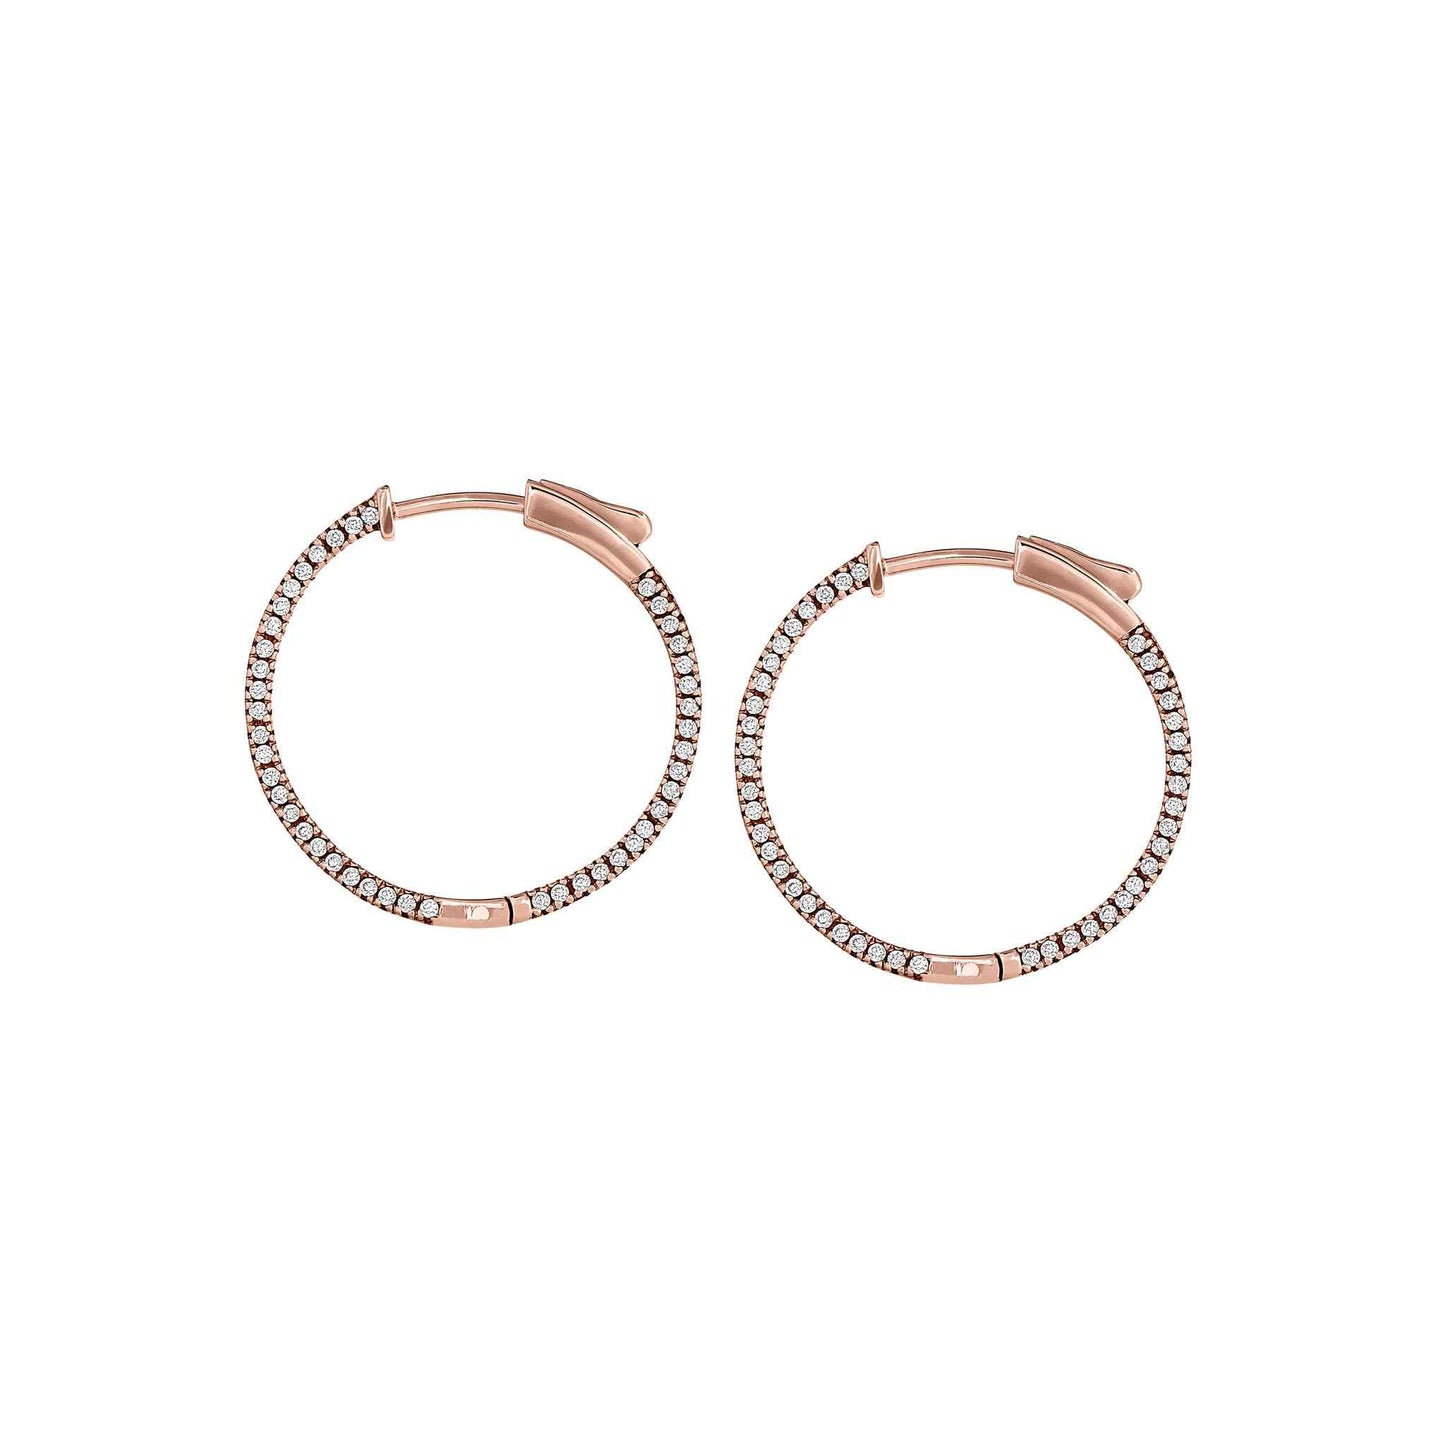 A side stone medium hoop earrings with simulated diamonds displayed on a neutral white background.